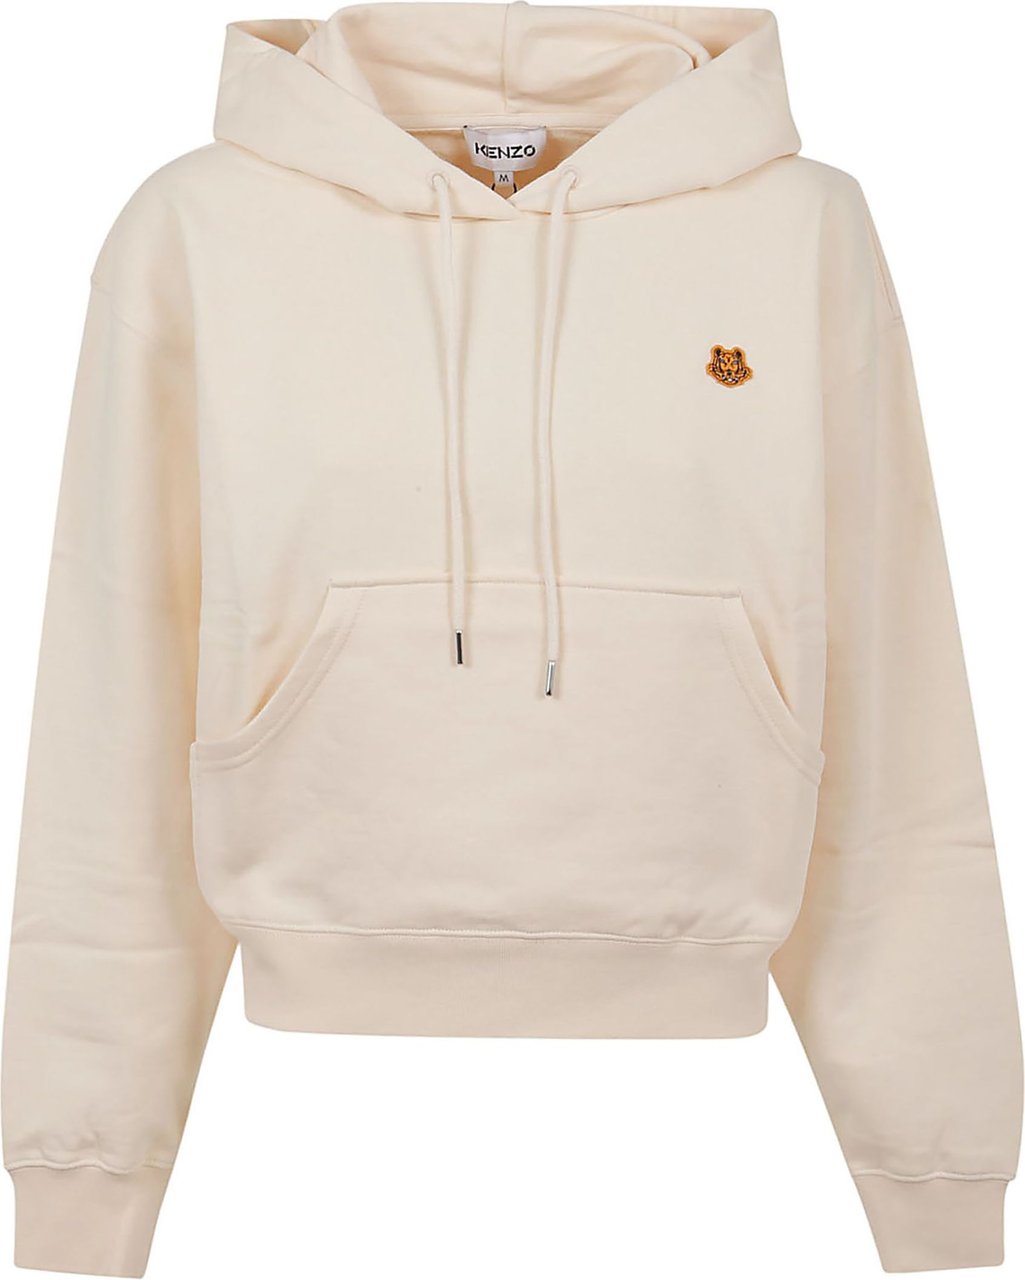 Kenzo Tiger Crest Boxy Hoodie Divers